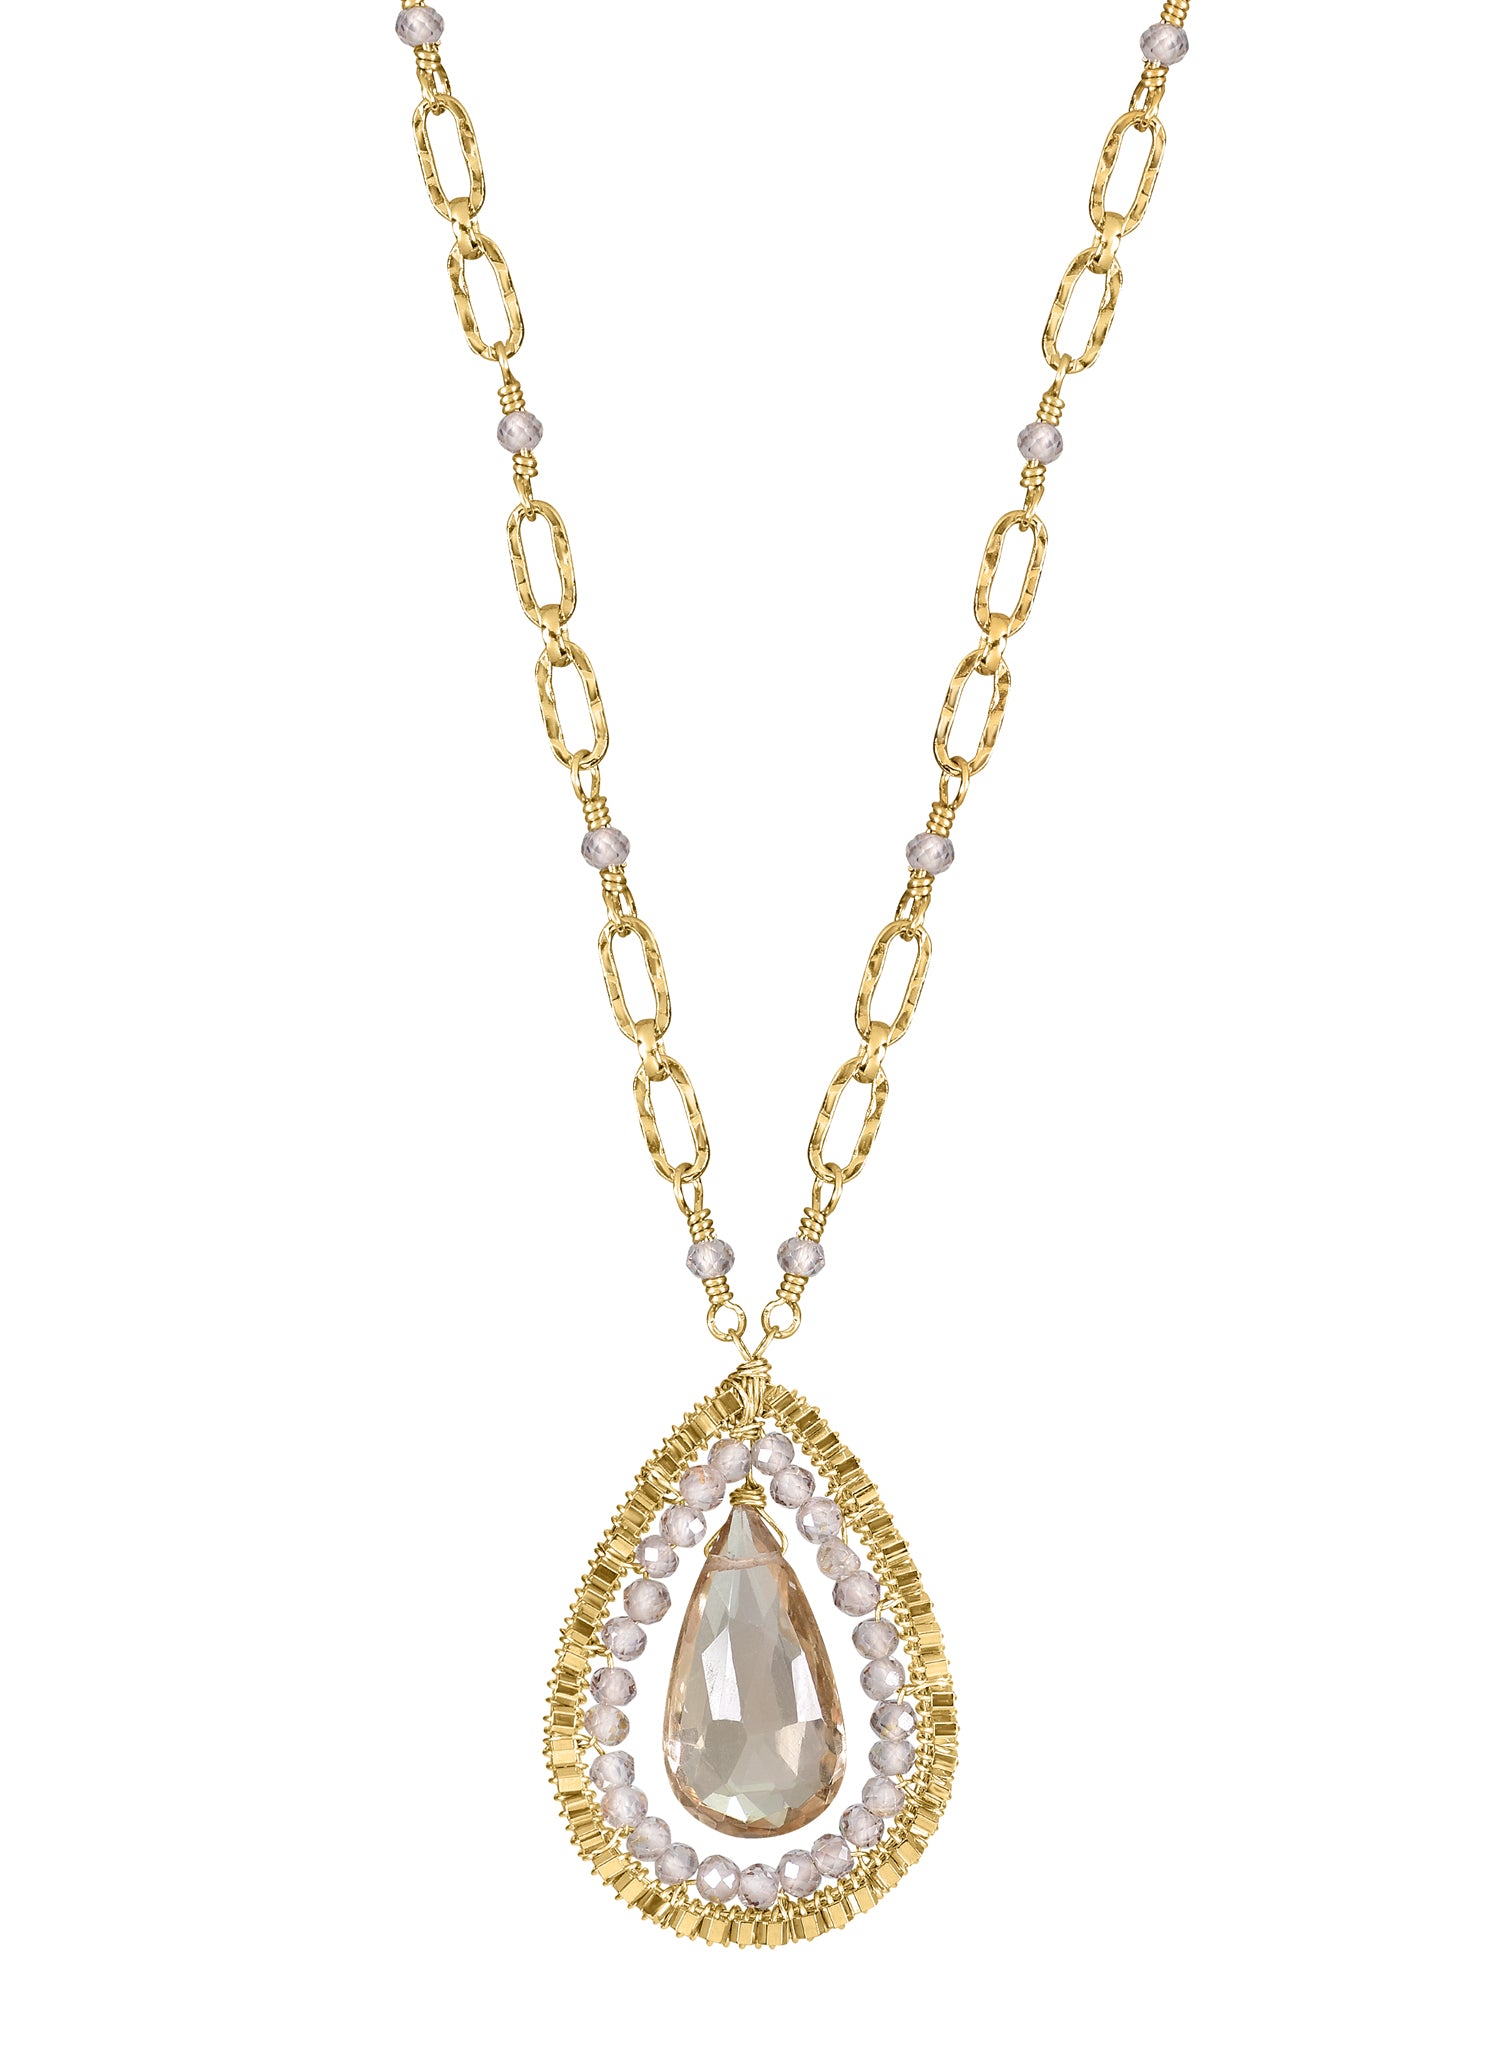 Champagne citrine Brown zircon Seed beads 14k gold fill Necklace measures 17-7/8" in length Pendant measures 1" in length and 3/4" in width at the widest point Handmade in our Los Angeles studio